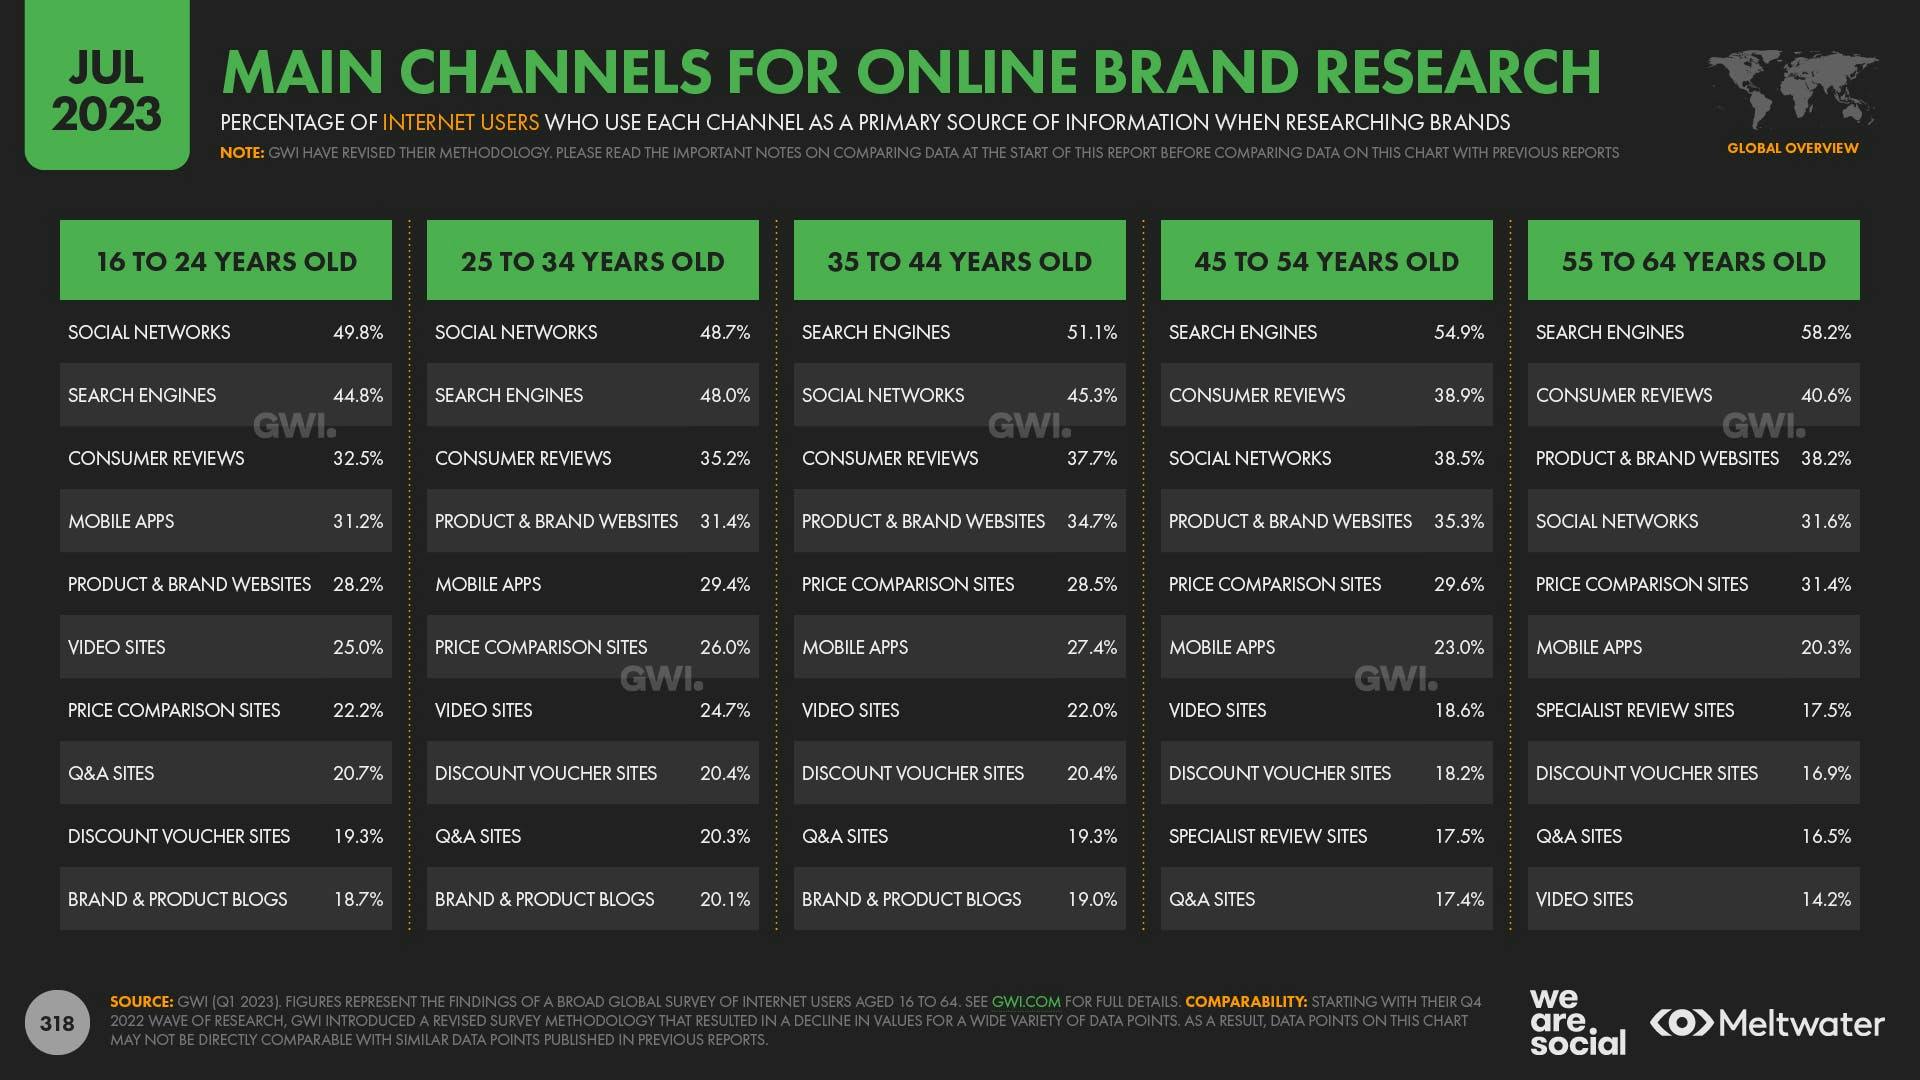 Channels for brand research by age